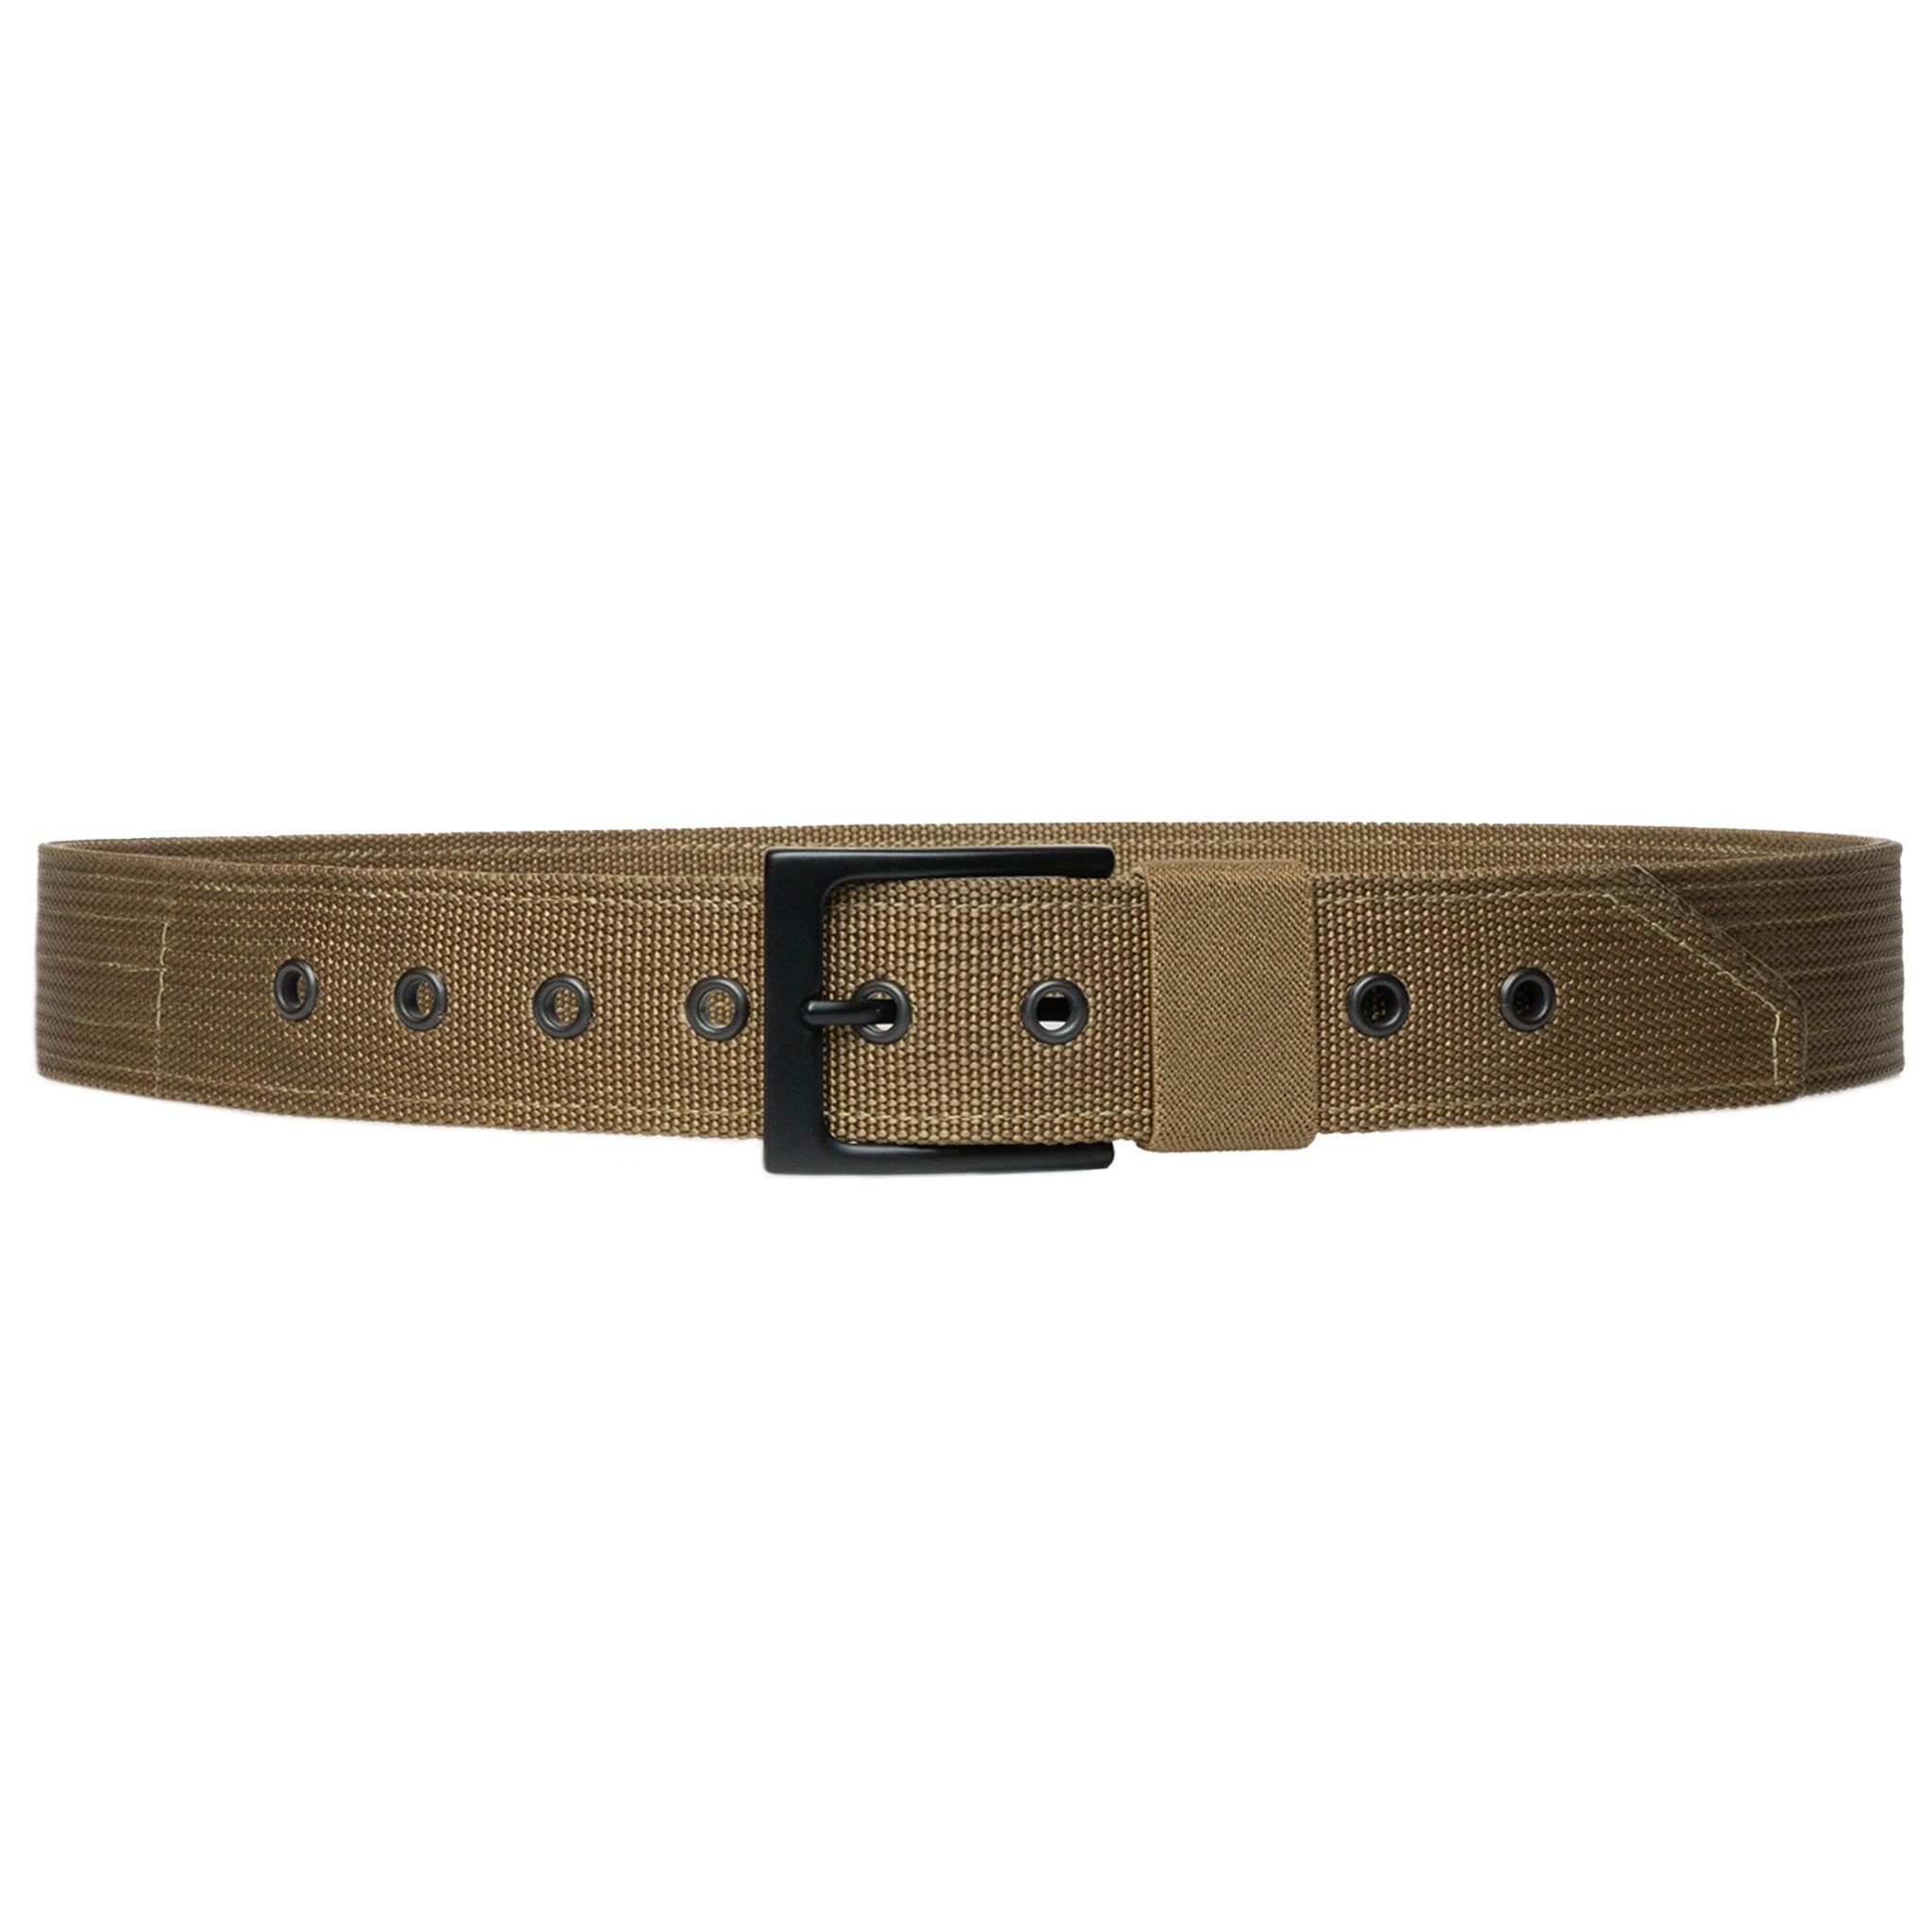 Emissary EDC Belt in Coyote with Black Buckle